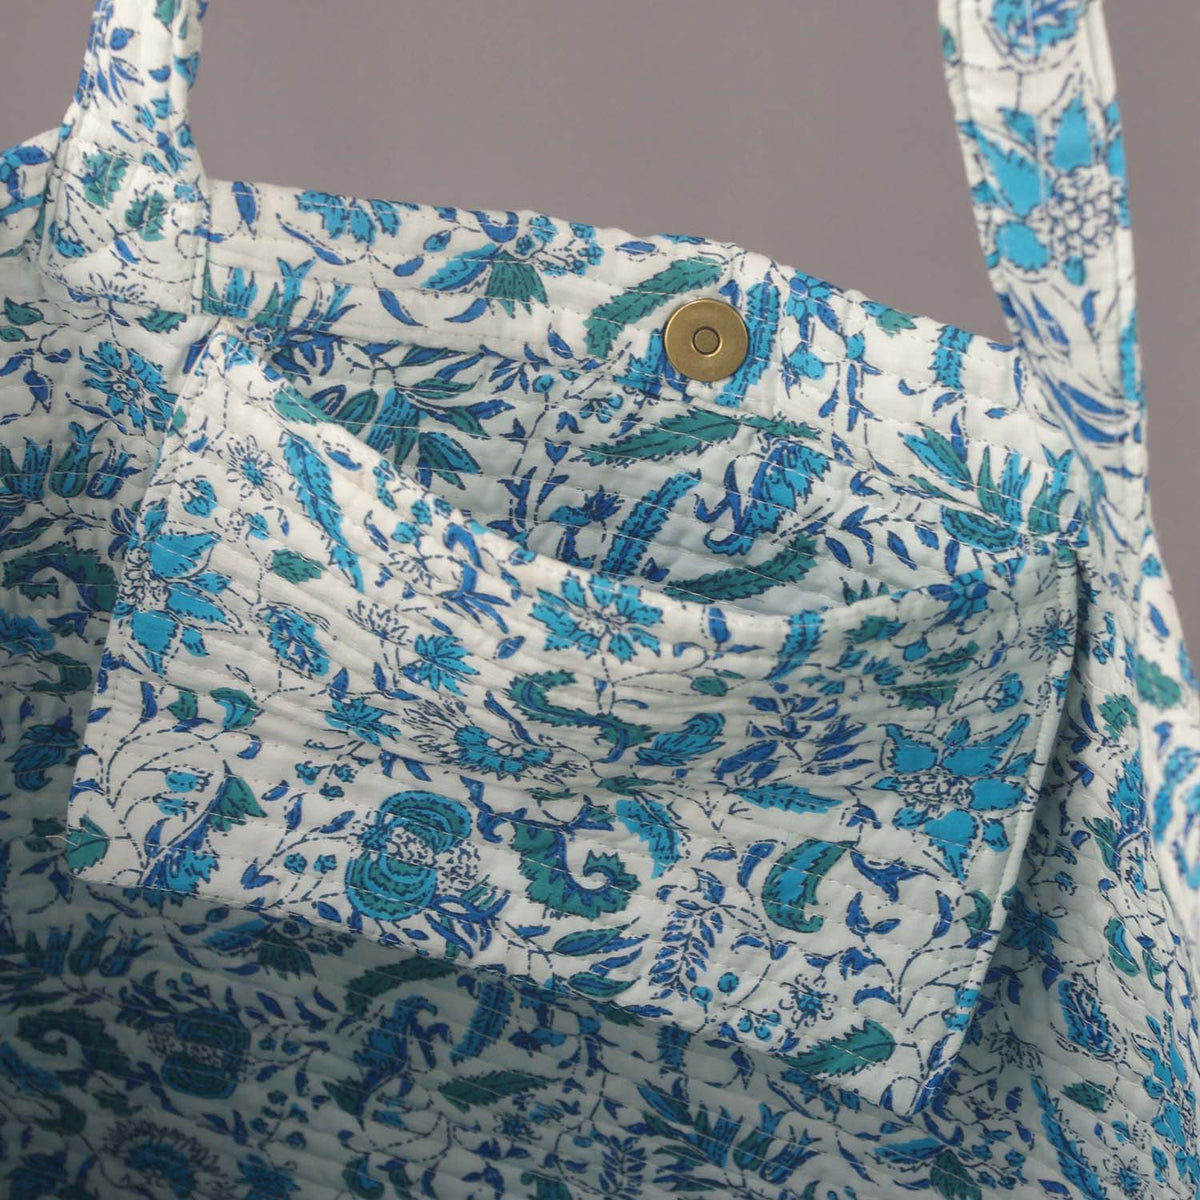 Cotton Quilted Large Shoppping / Beach Bag - White Blue Floral Print